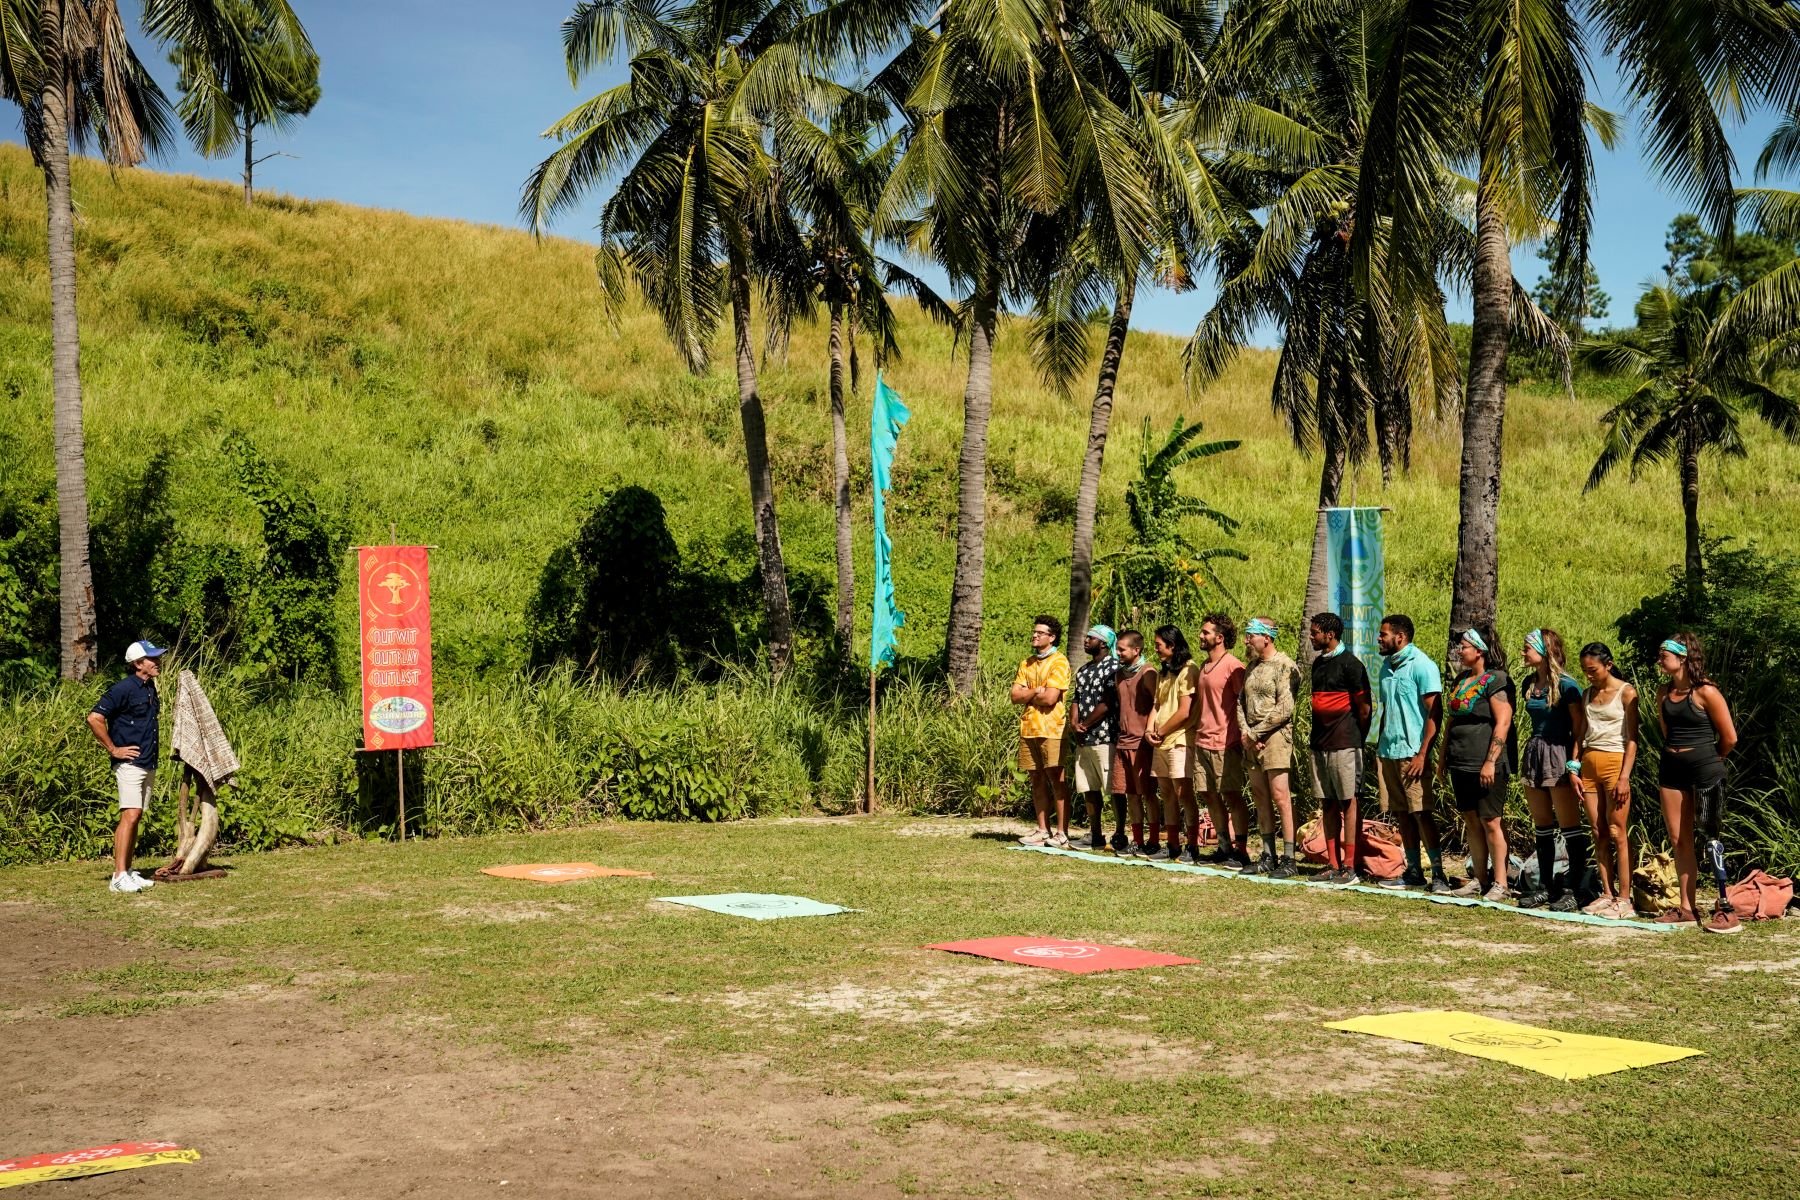 Host Jeff Probst explains a challenge to the remaining 12 'Survivor' Season 43 castaways, one of which will be the winner.